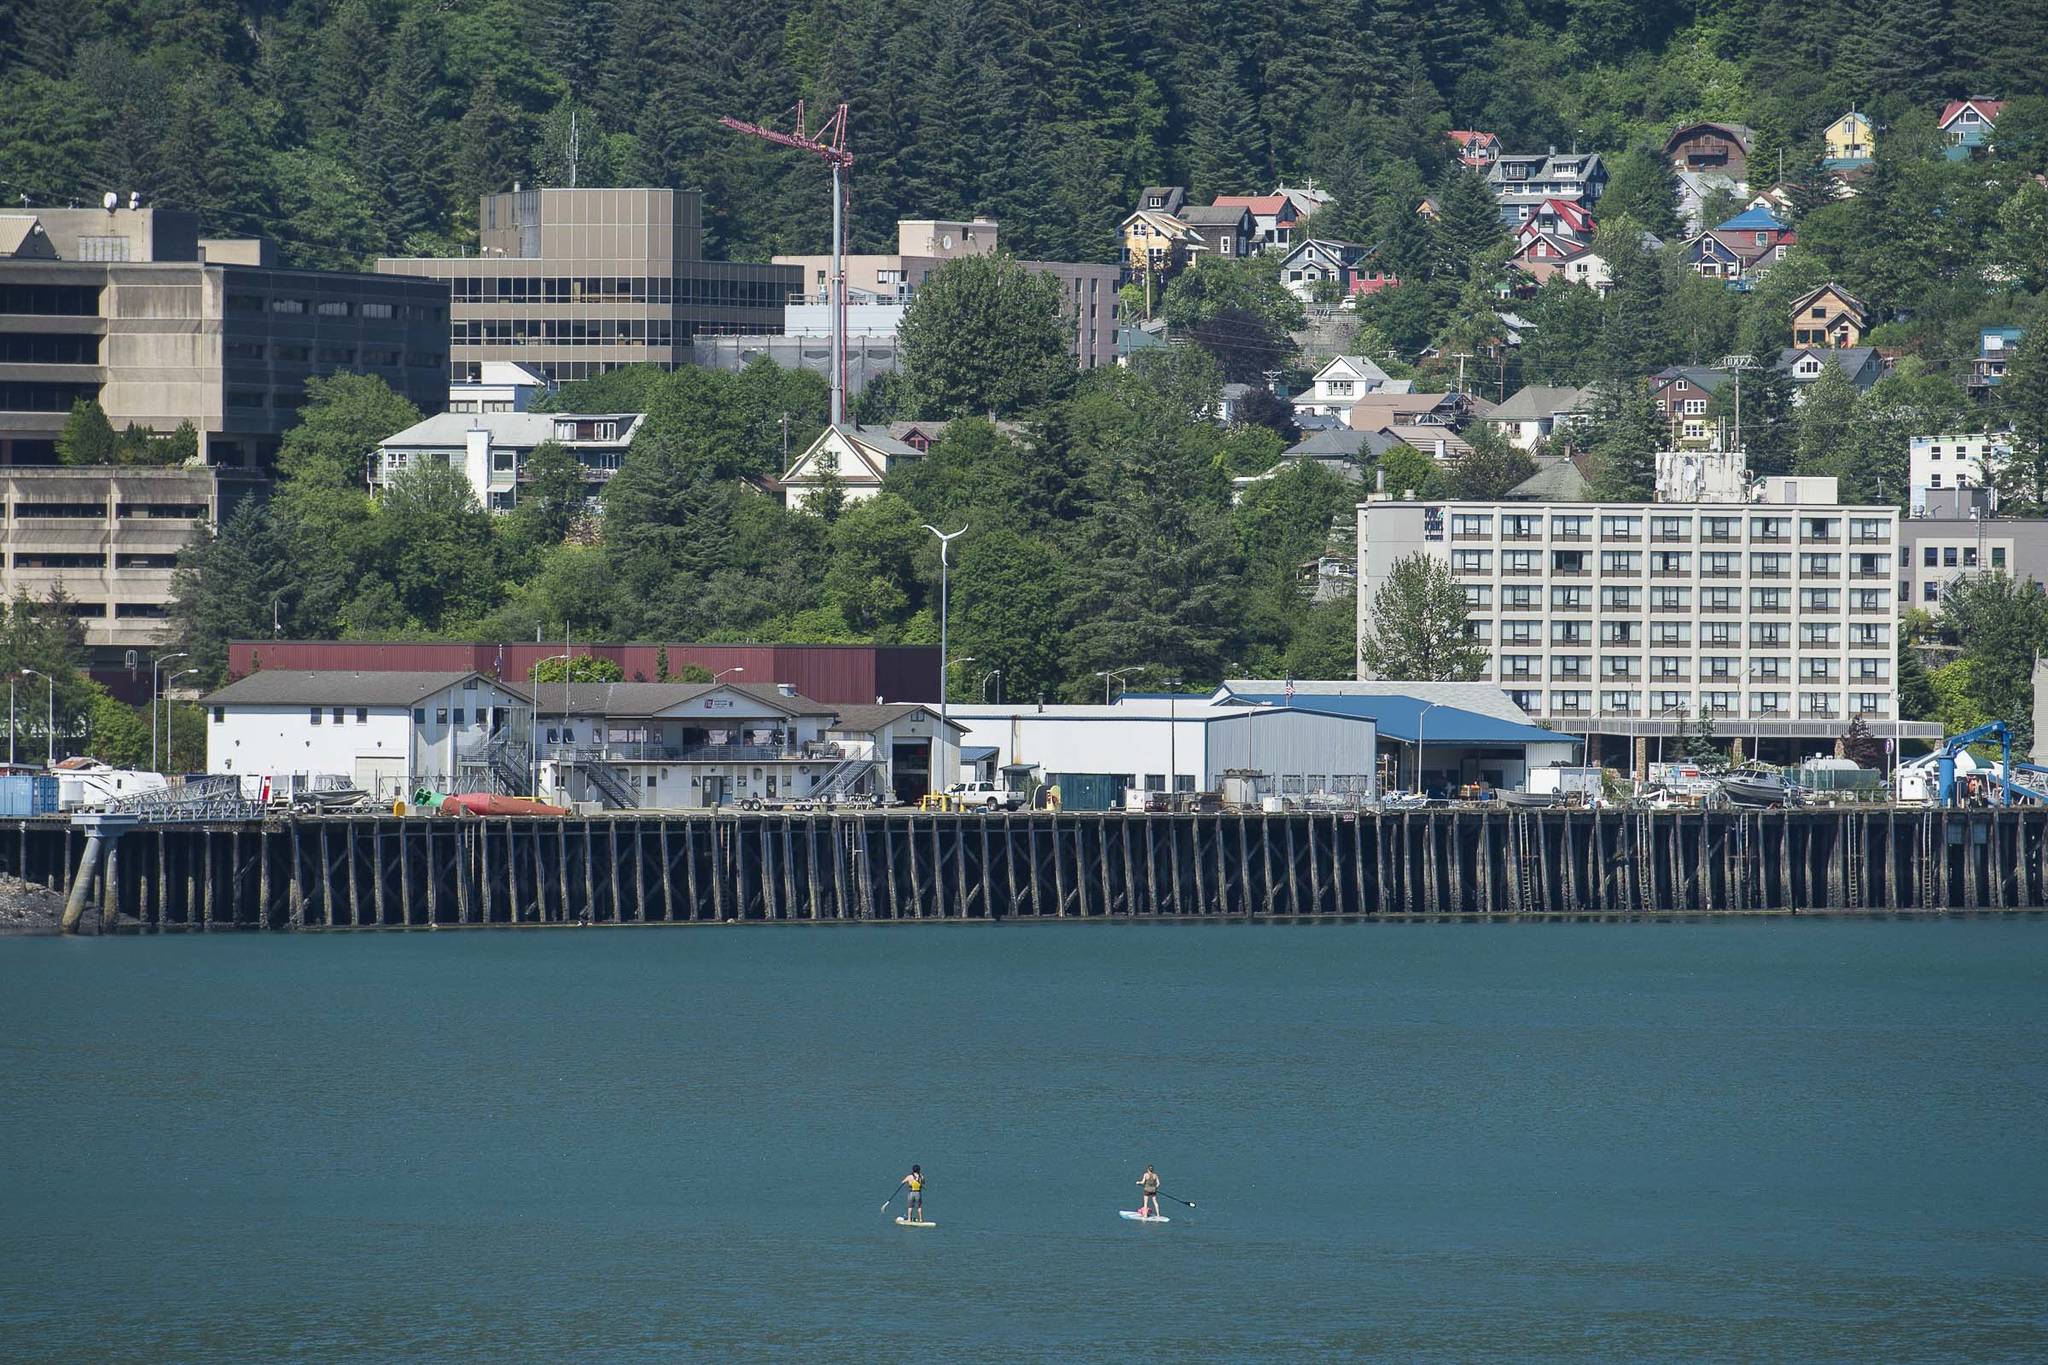 Lionel Uddipa and Tessany Alrich explore Juneau’s downtown harbor by paddleboard on Thursday, June 27, 2019. (Michael Penn | Juneau Empire)